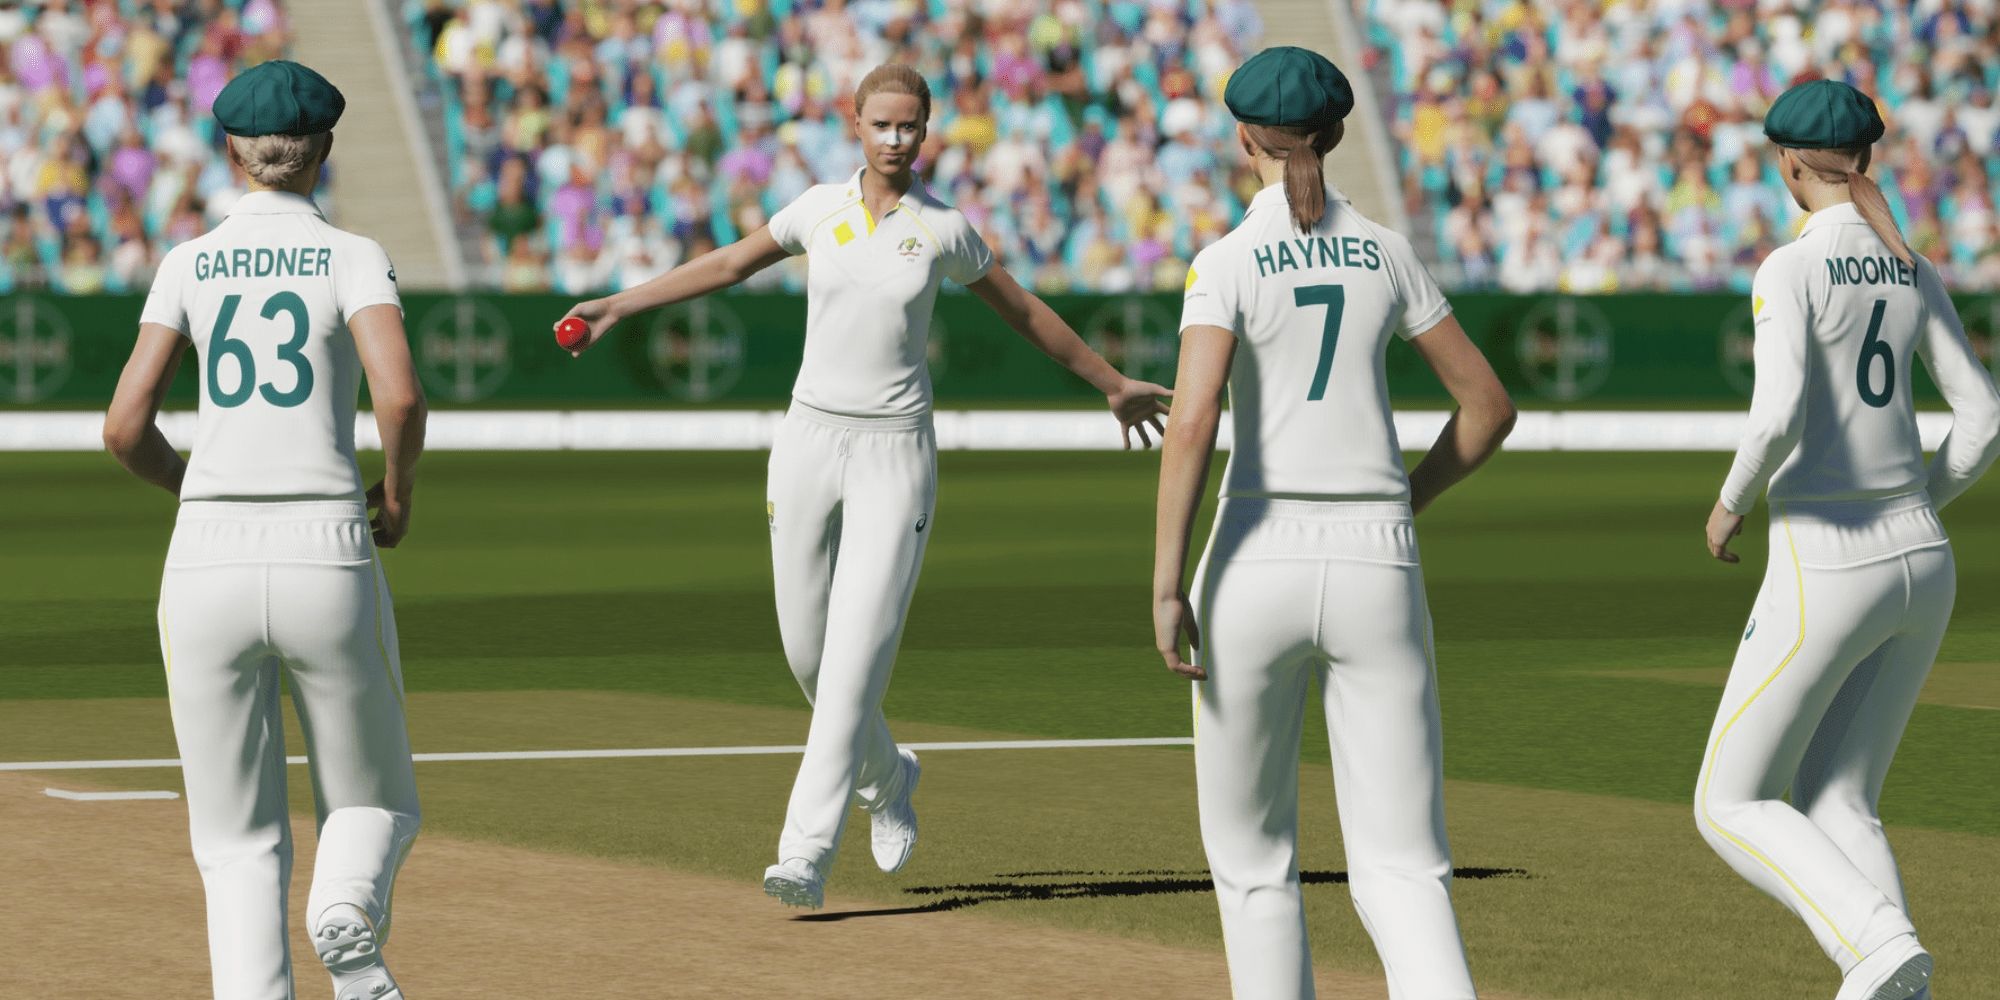 CRICKET 22 TIPS FOR BEGINNERS